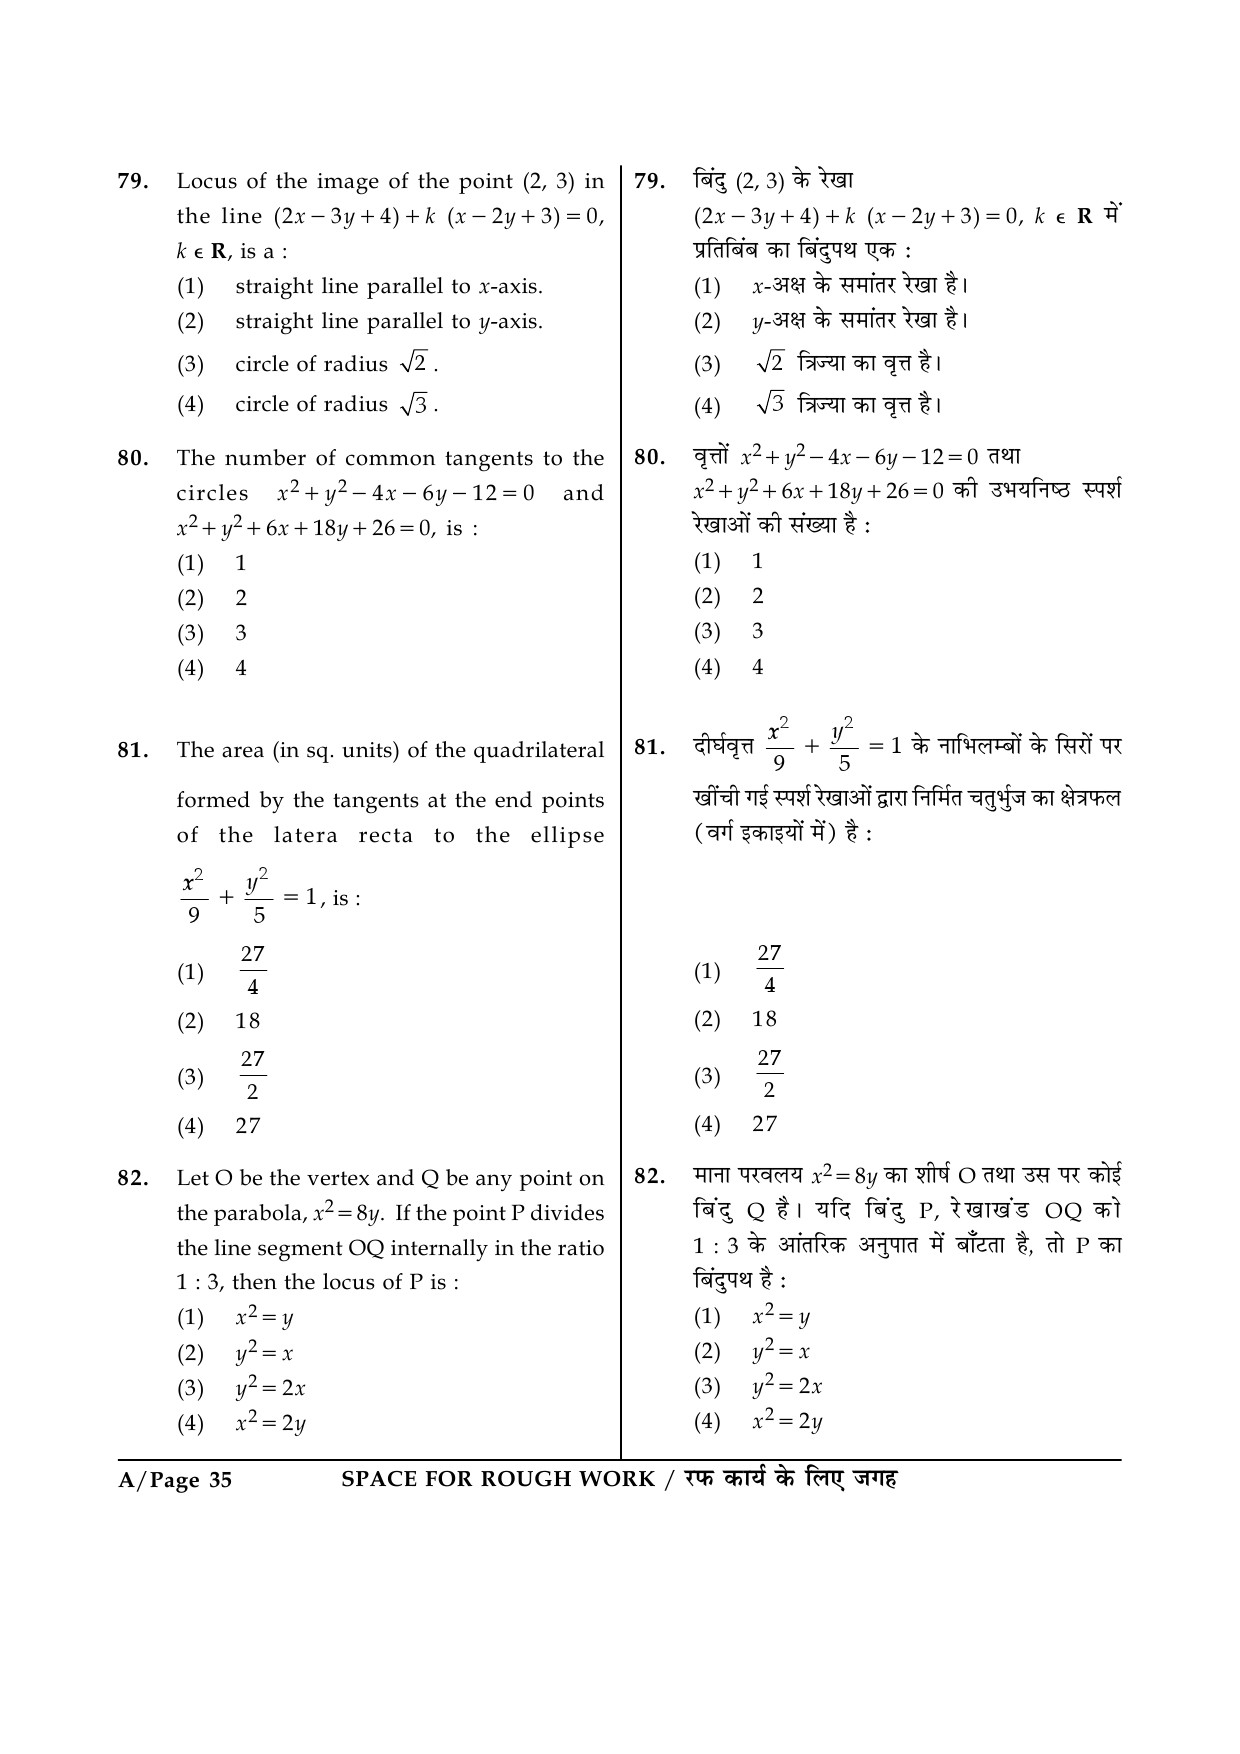 JEE Main Exam Question Paper 2015 Booklet A 35